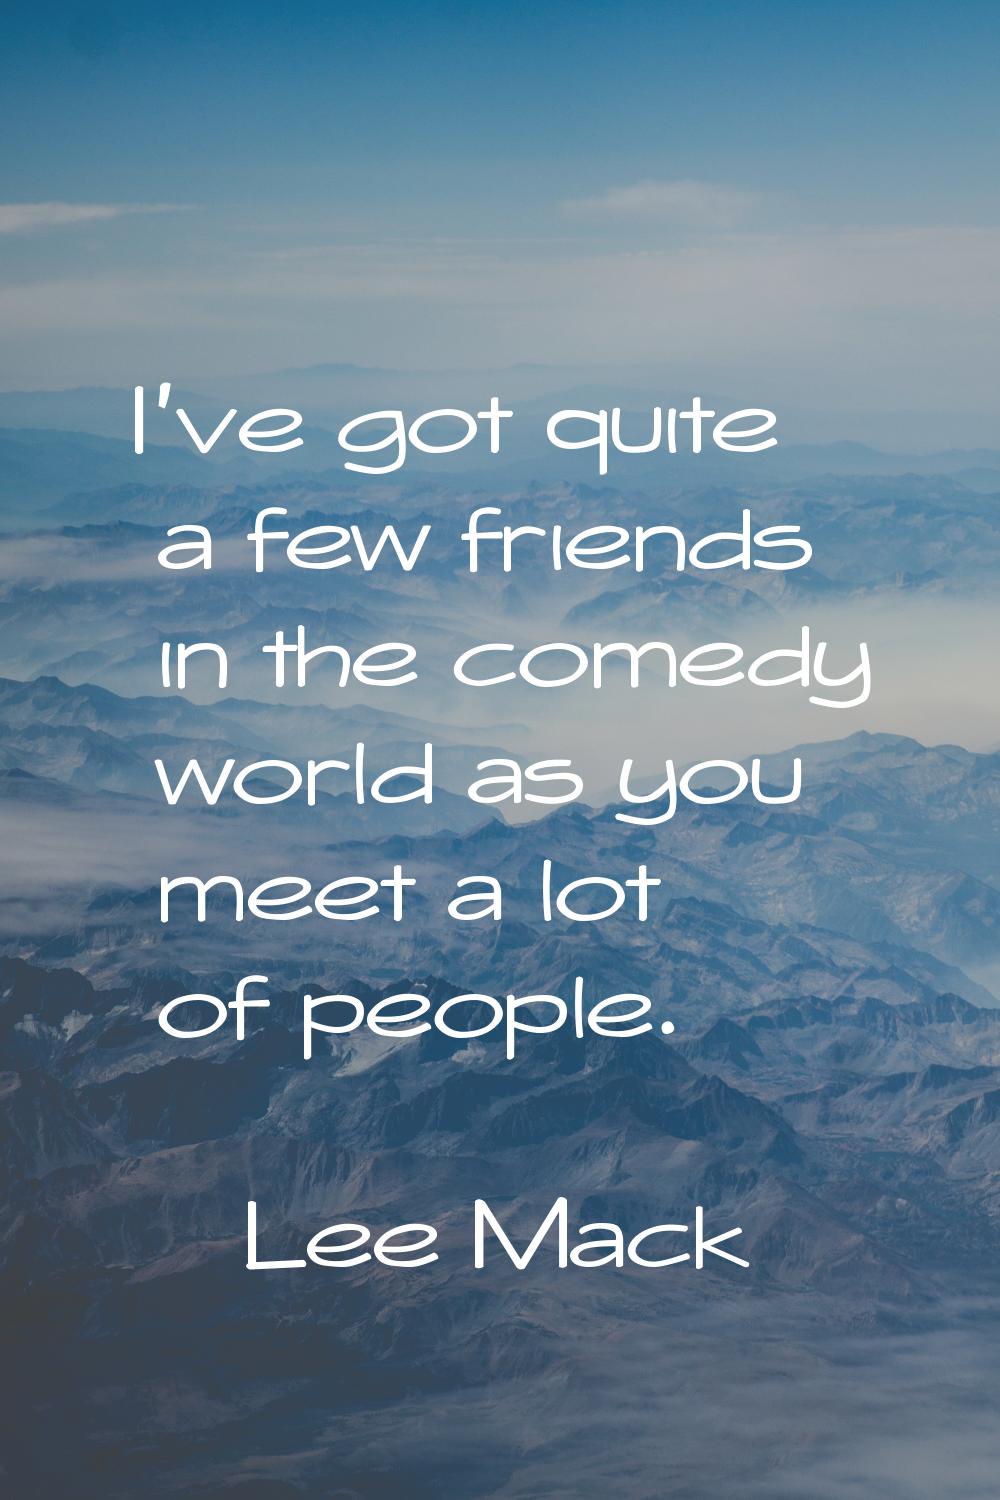 I've got quite a few friends in the comedy world as you meet a lot of people.